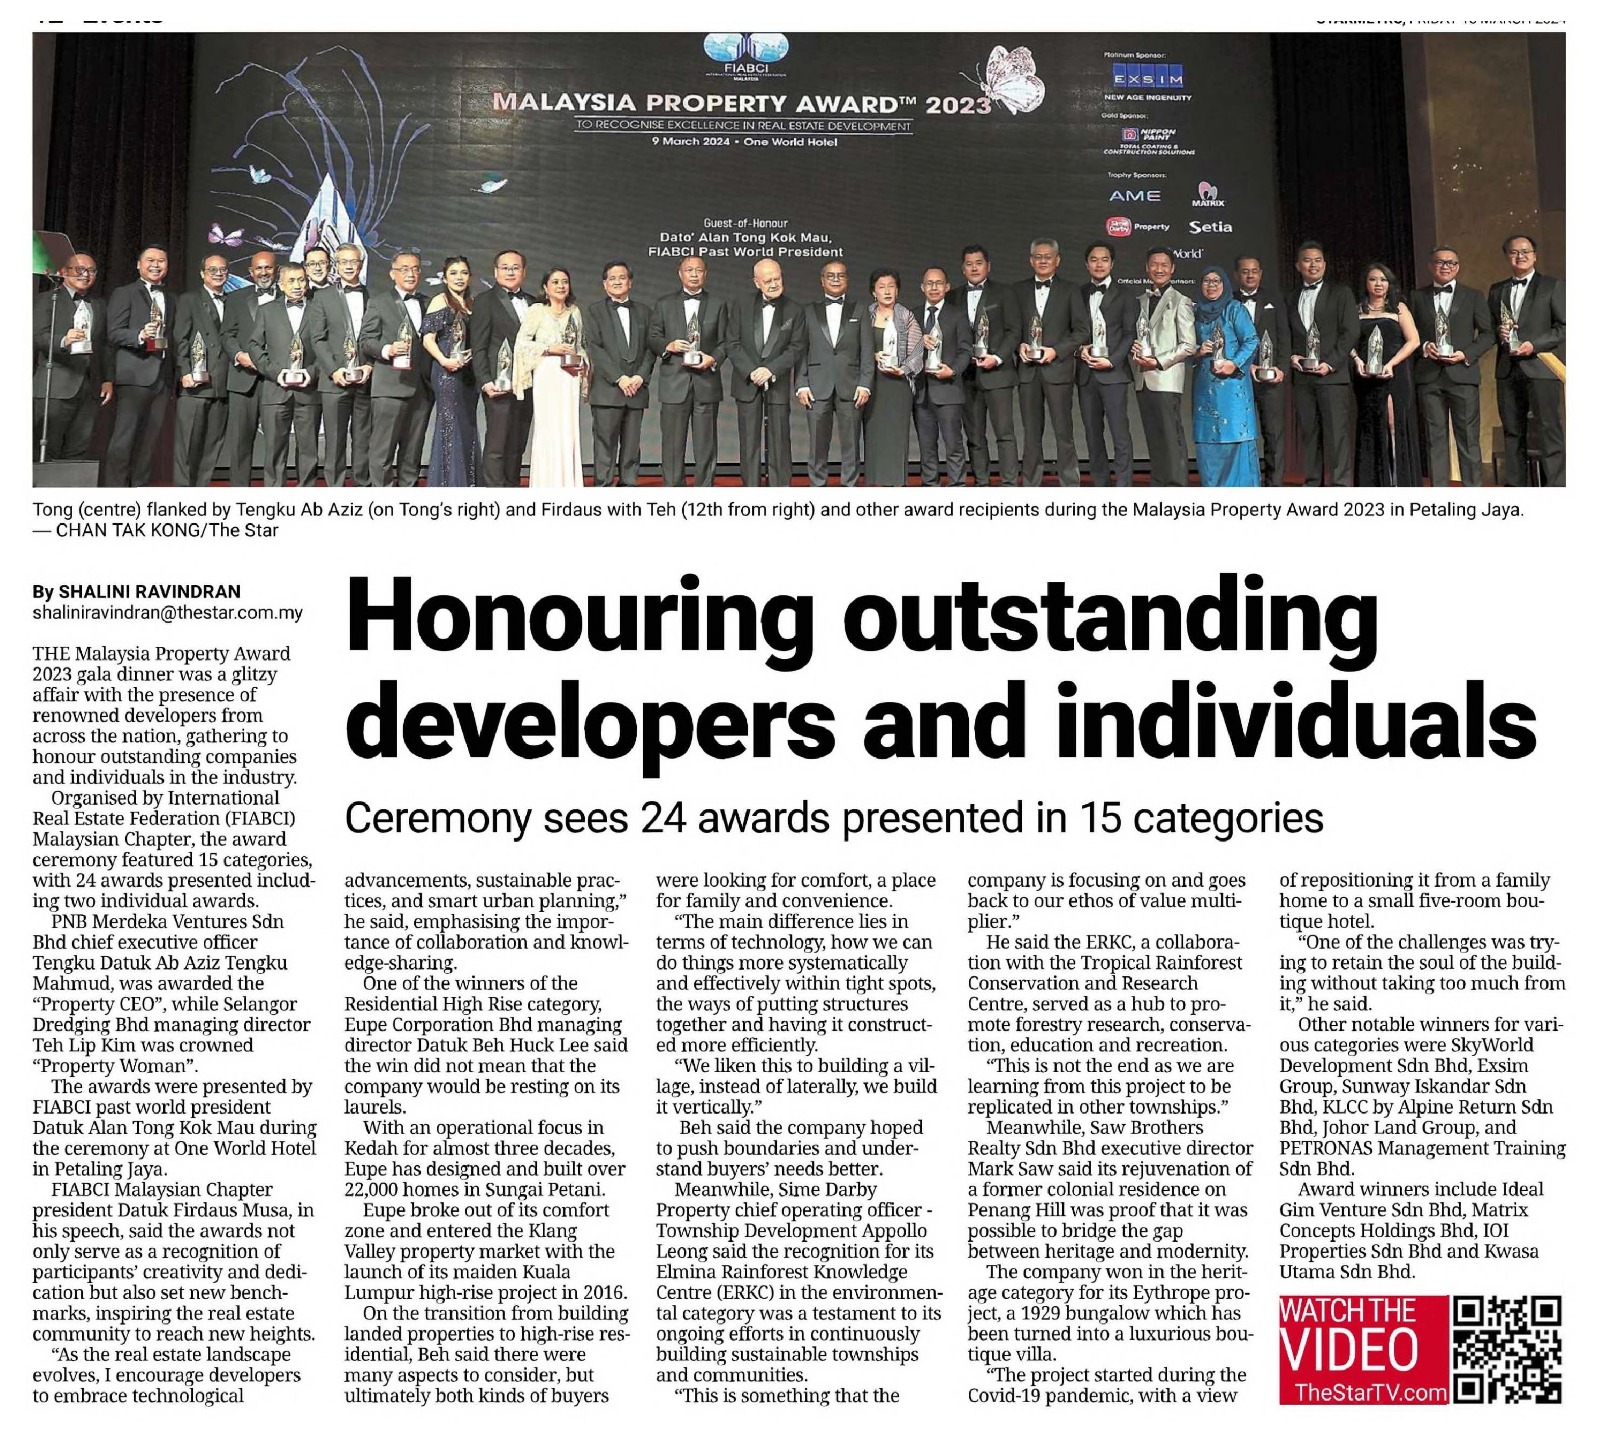 Honouring outstanding developers and individuals